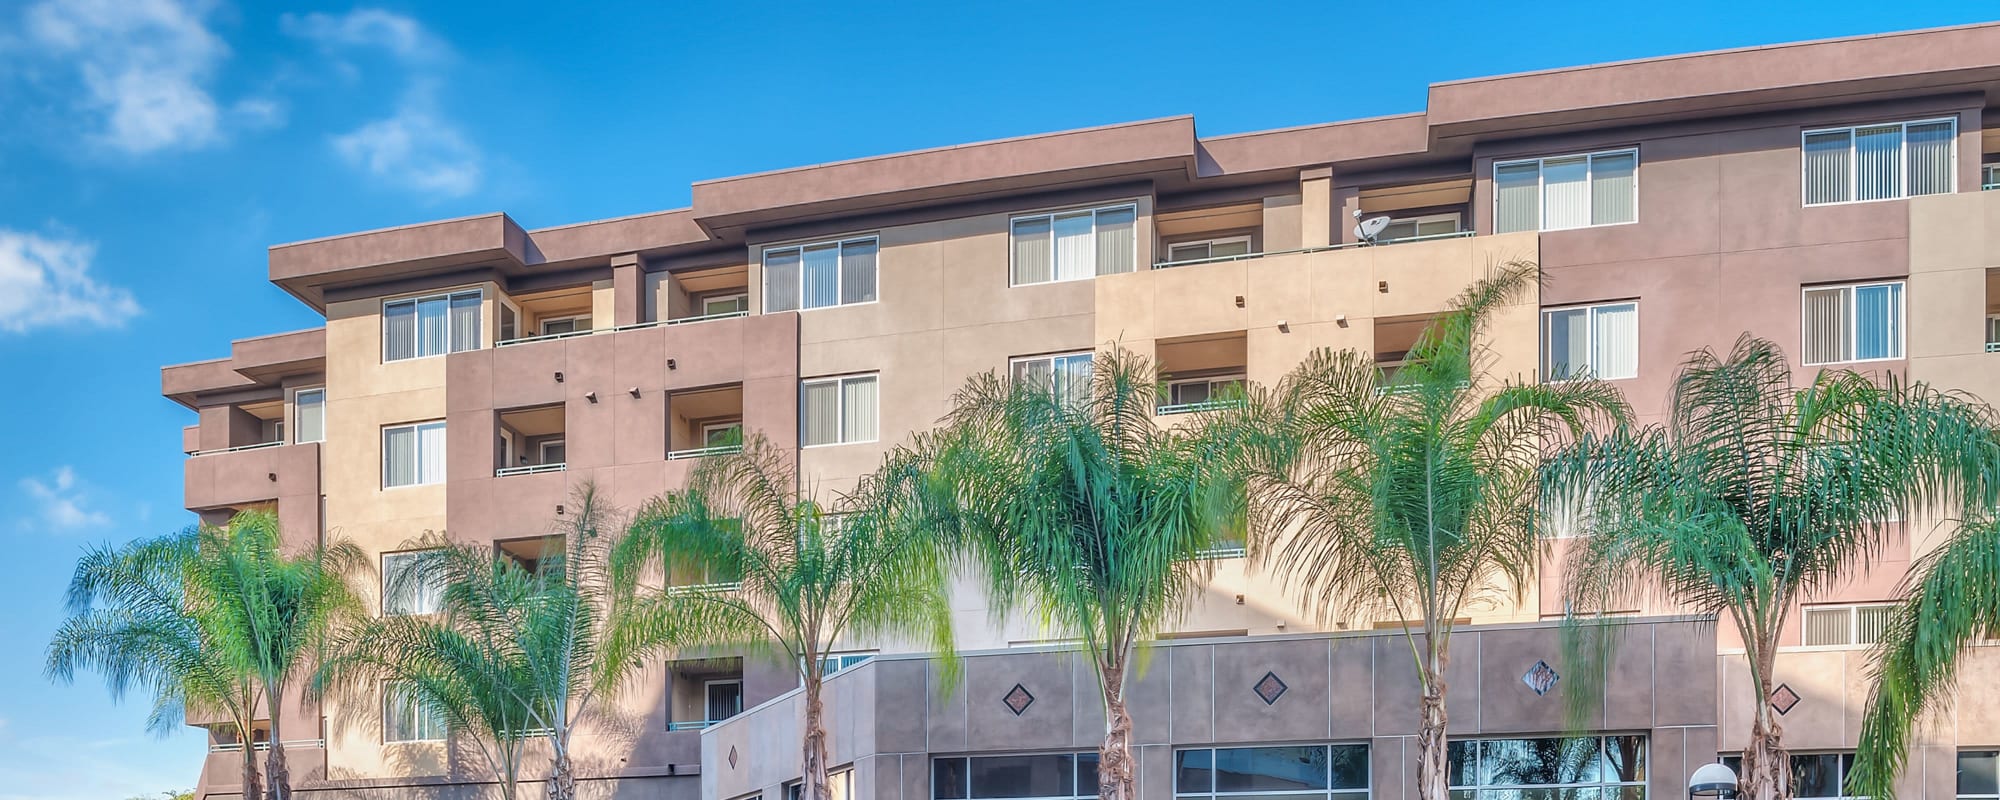 Floor plans at The Pointe Apartments in Brea, California